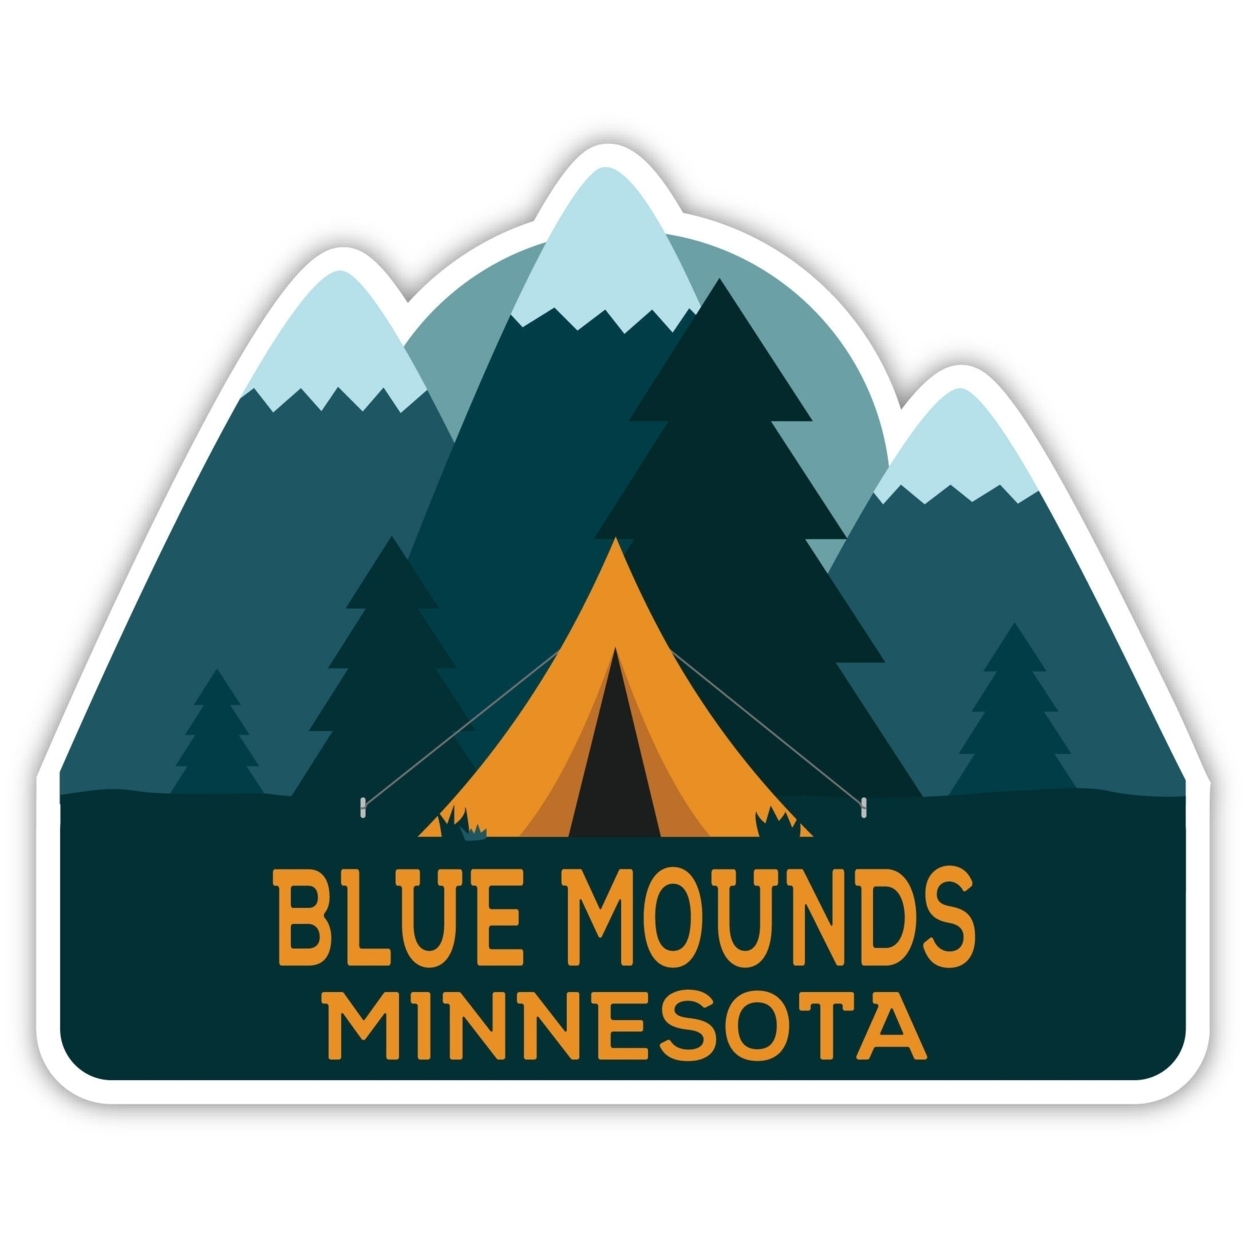 Blue Mounds Minnesota Souvenir Decorative Stickers (Choose Theme And Size) - 4-Pack, 10-Inch, Tent